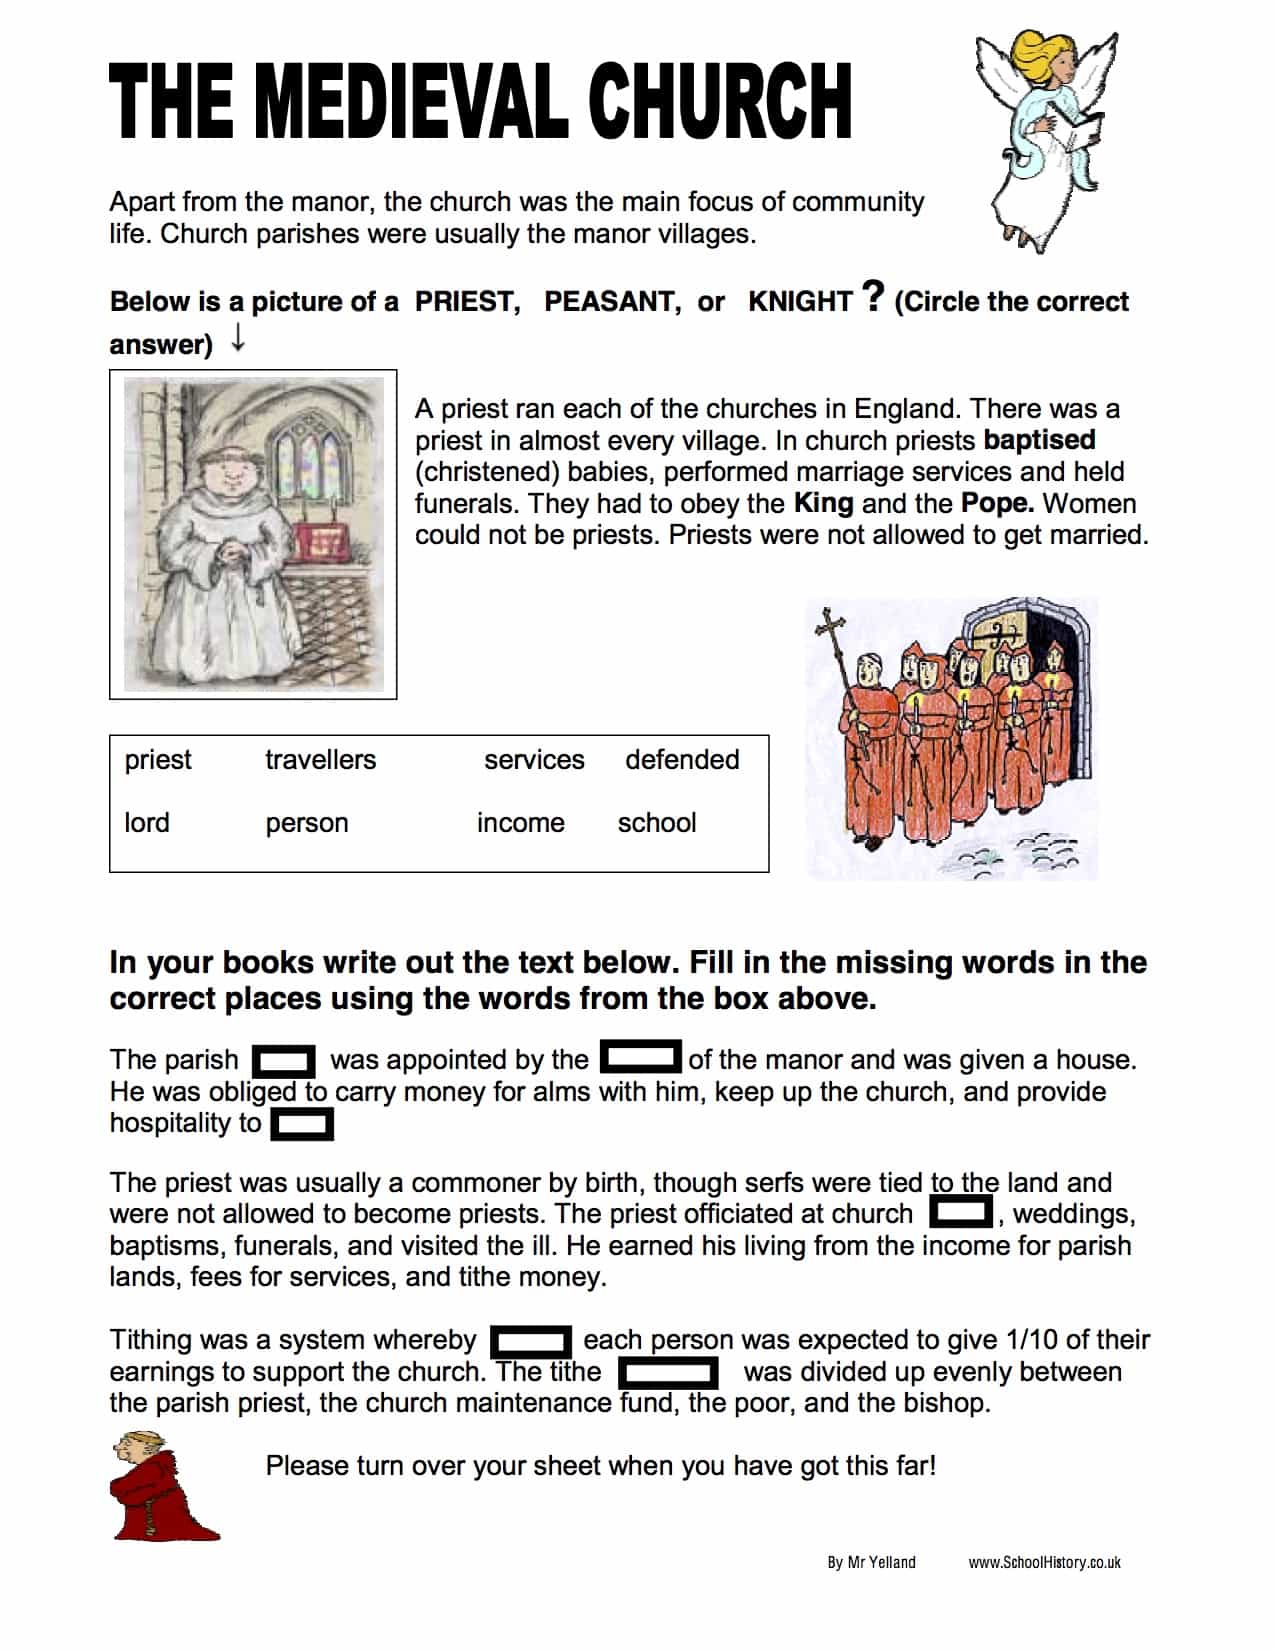 The Medieval Church Summary & Facts (SEN) - Free Worksheet